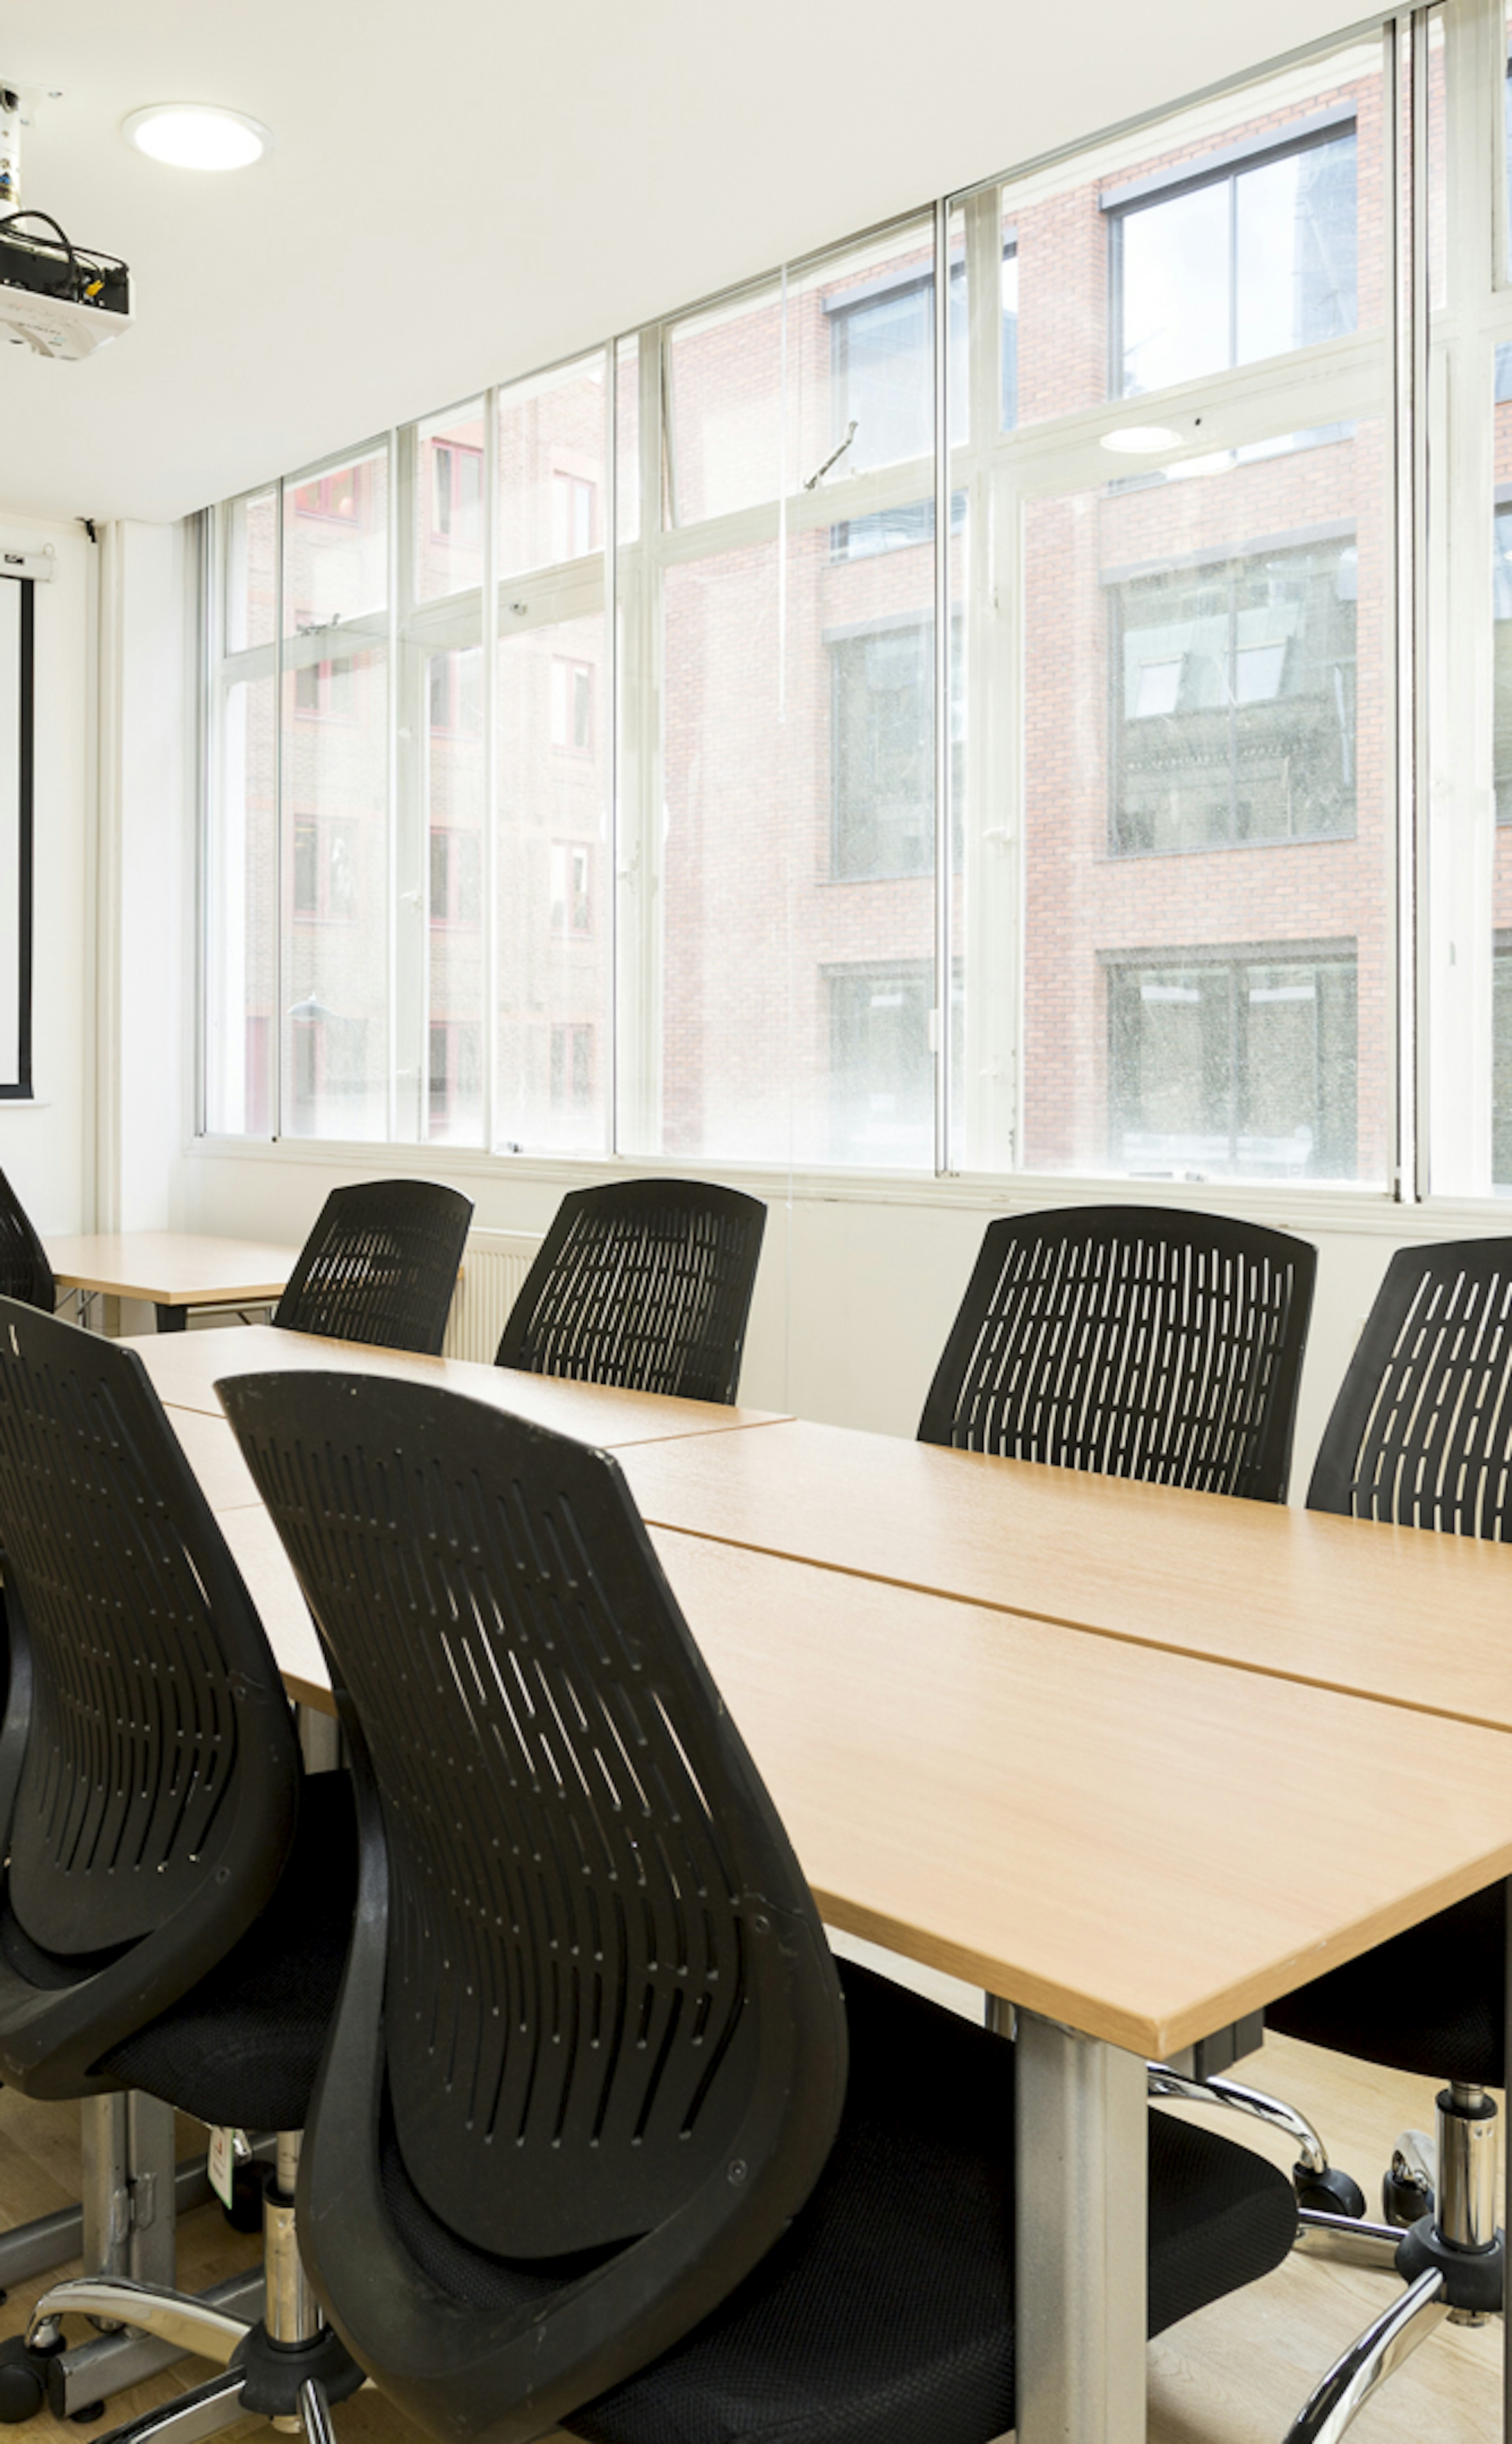 Cheap Meeting Rooms - The Training Room Hire Company